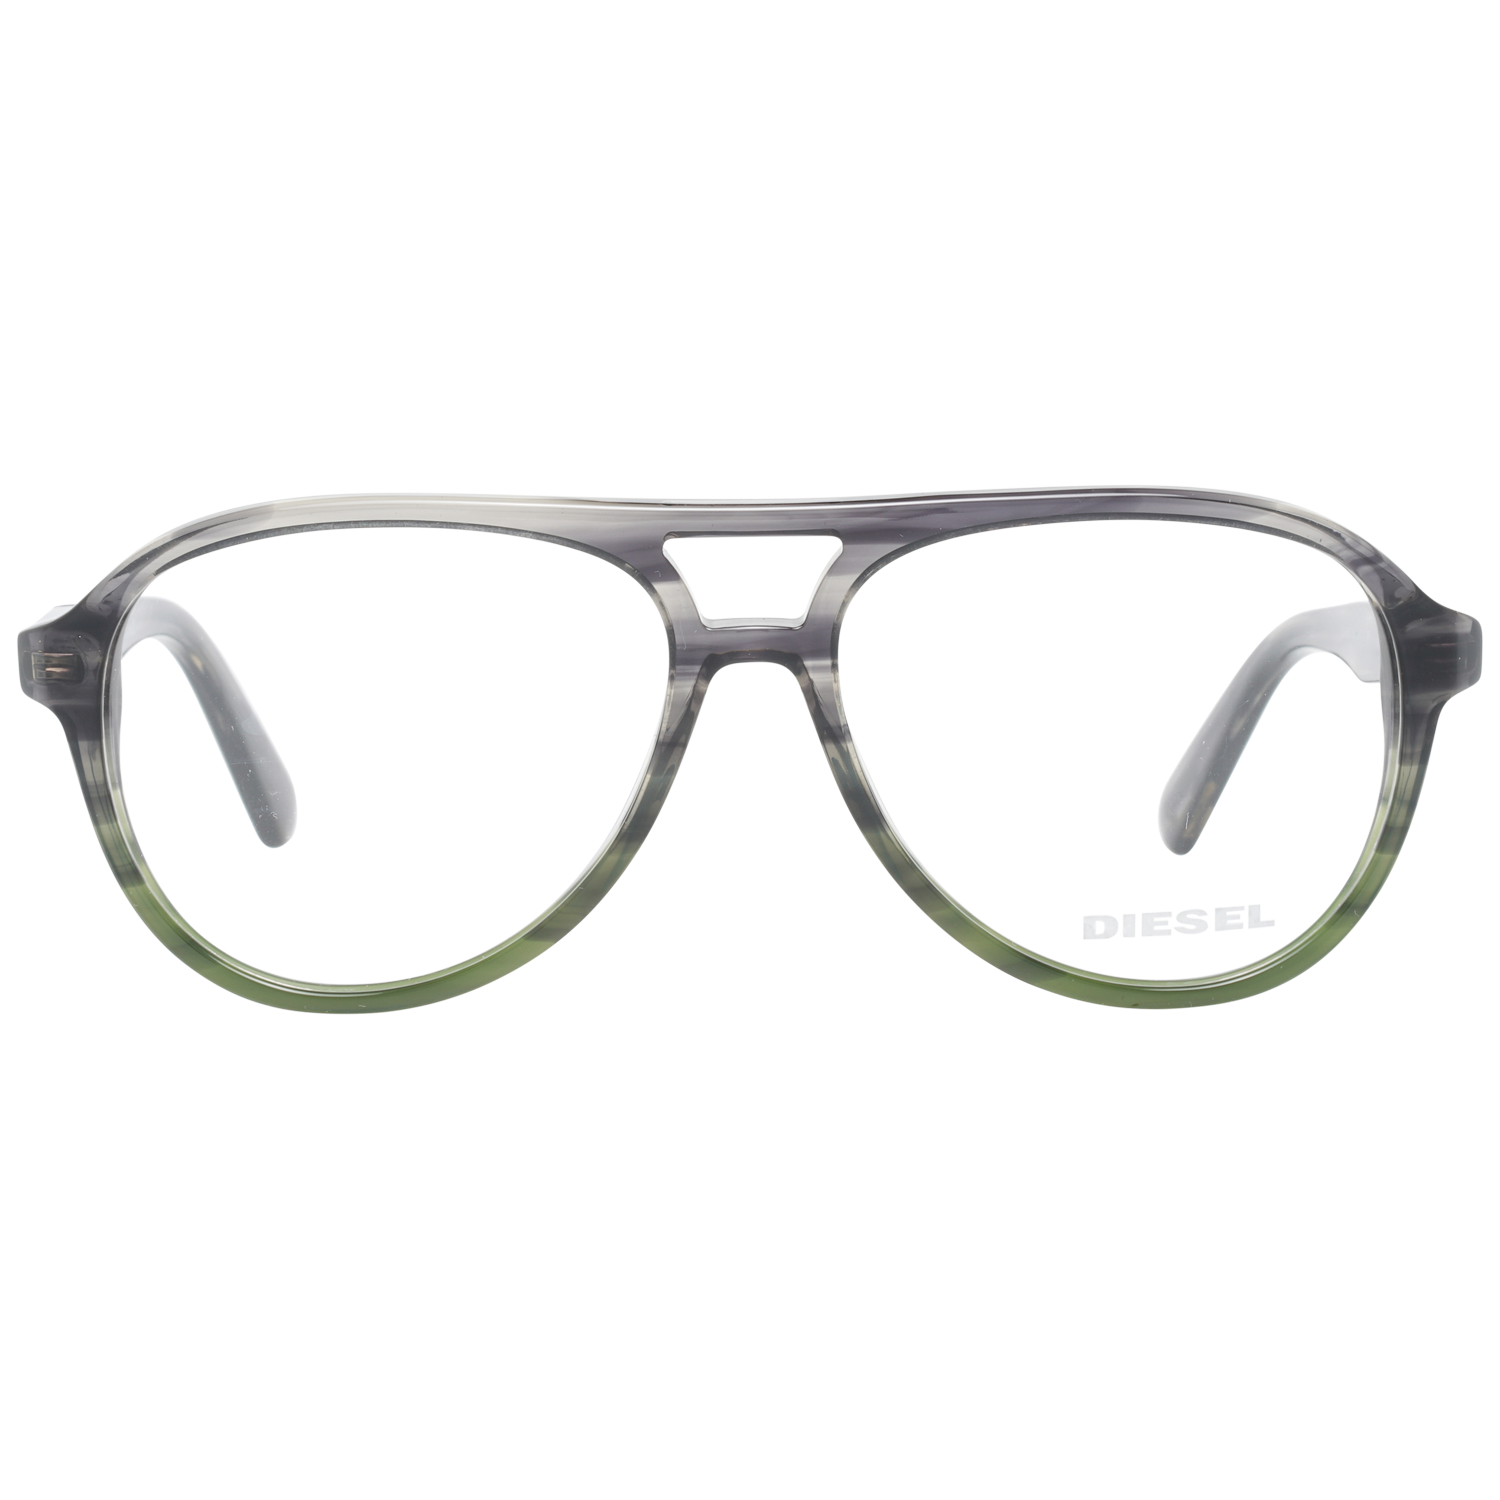 GenderMenMain colorGreyFrame colorGreyFrame materialPlasticSize54-14-145Lenses width54mmLenses heigth44mmBridge length14mmFrame width140mmTemple length145mmShipment includesCase, Cleaning clothStyleFull-RimSpring hingeYesExtraNo extra